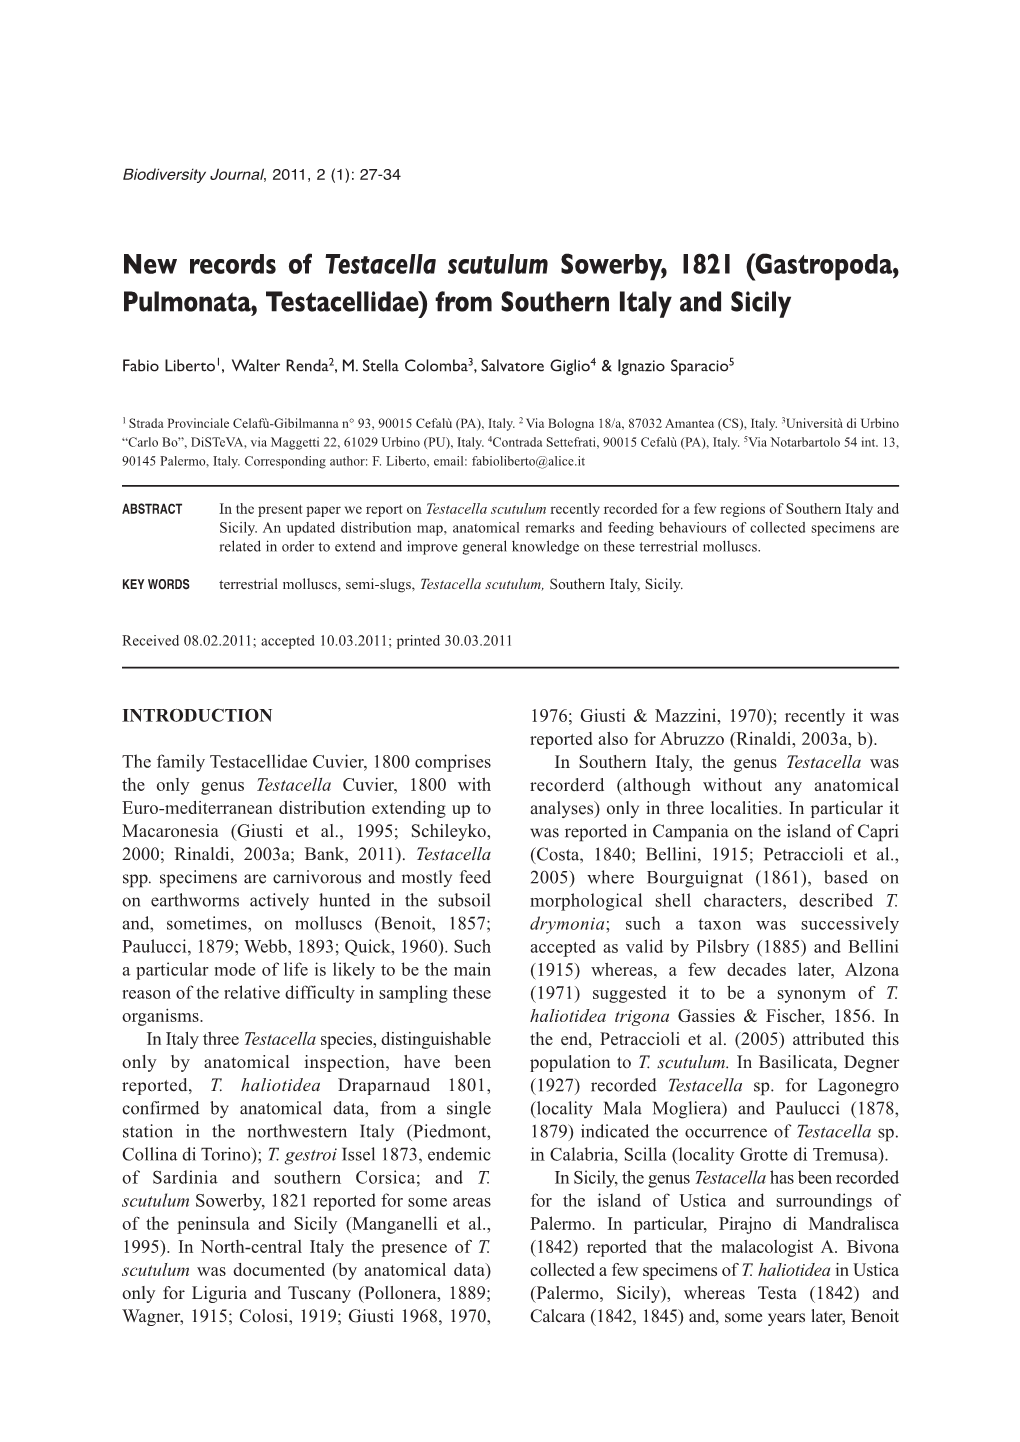 New Records of Testacella Scutulum Sowerby, 1821 (Gastropoda, Pulmonata, Testacellidae) from Southern Italy and Sicily